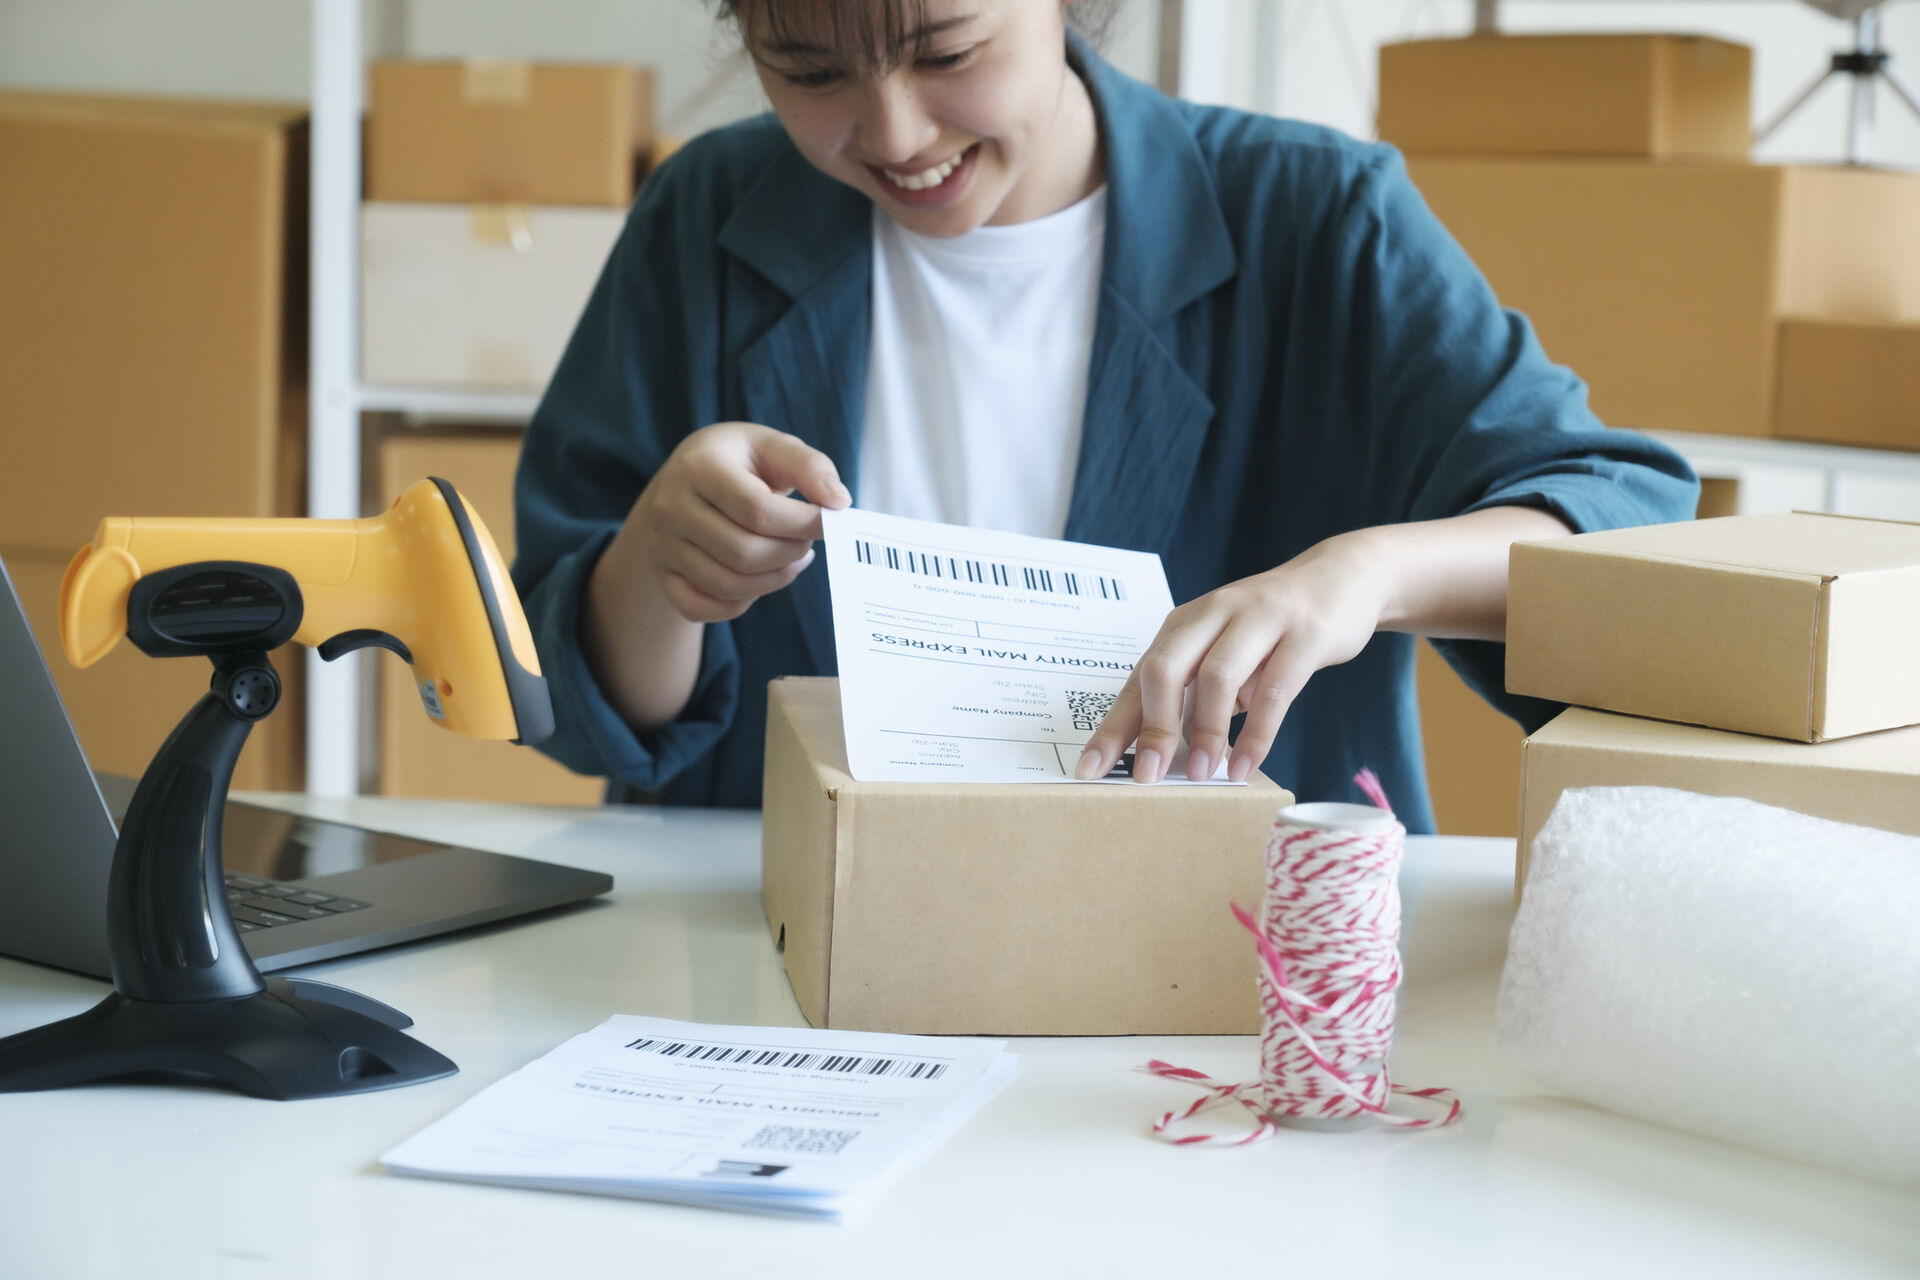 A young woman is attaching a shipping label to a package.